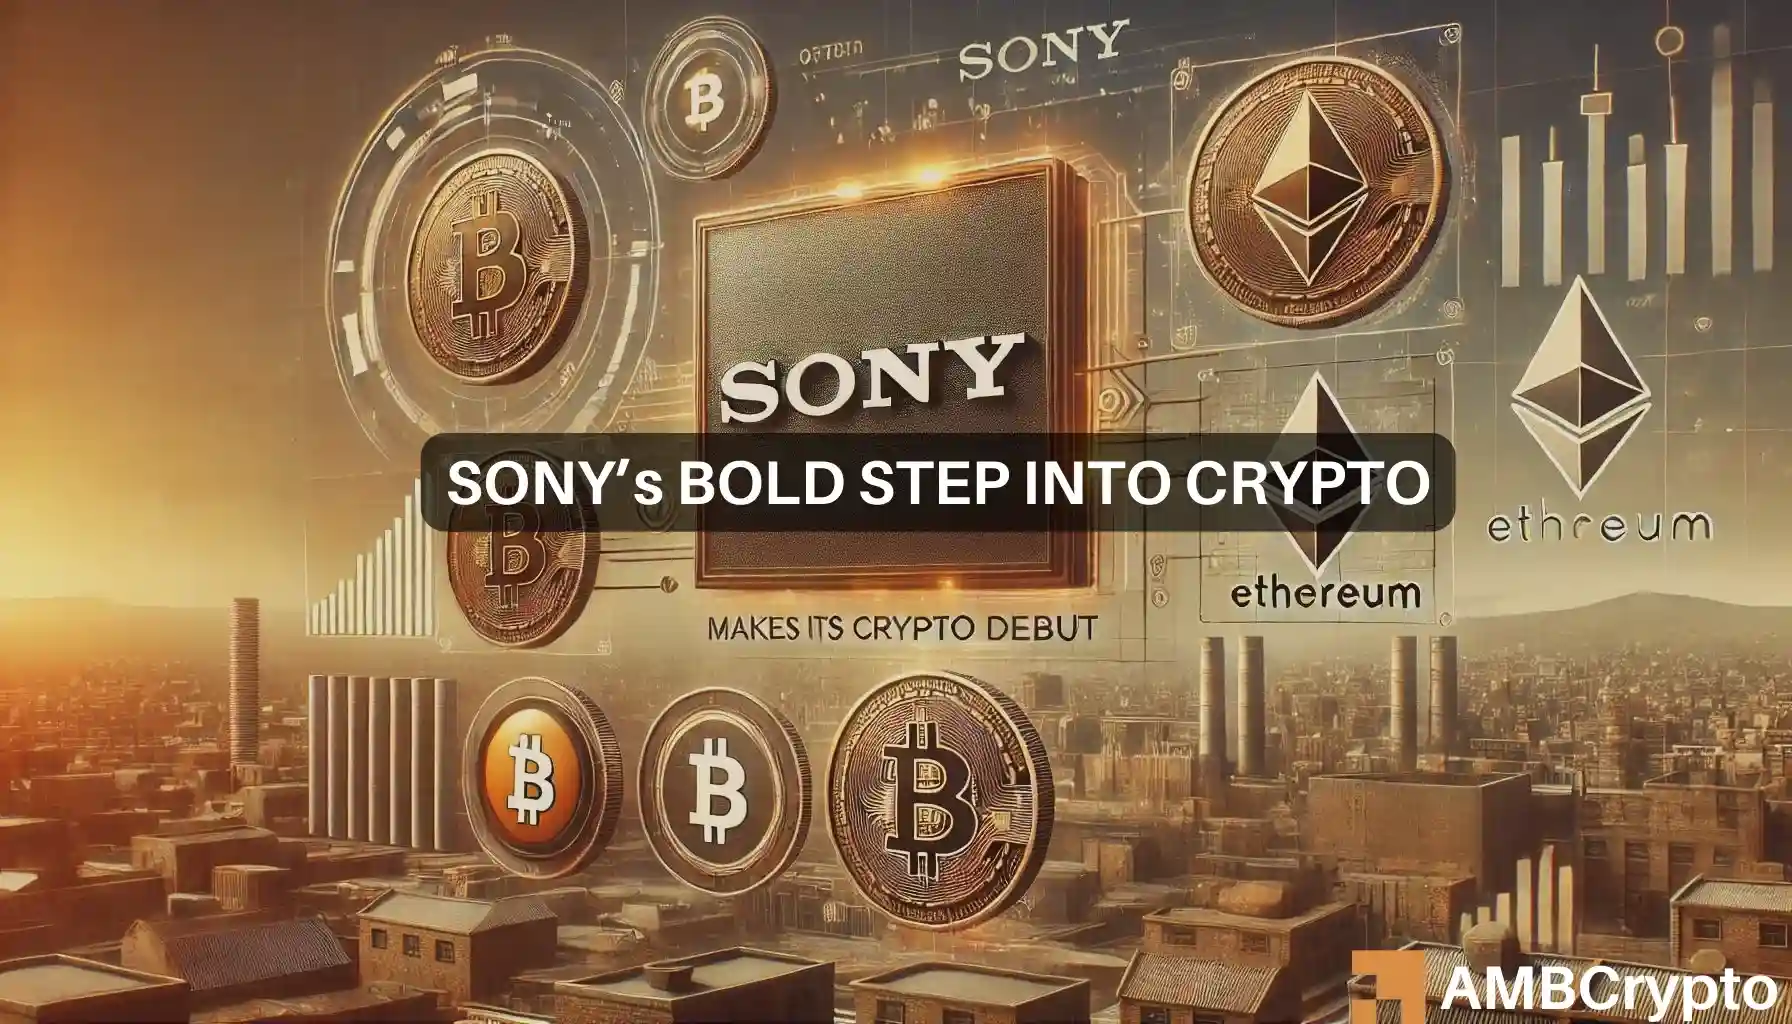 Sony’s crypto debut: Tech giant acquires Amber Japan in major move